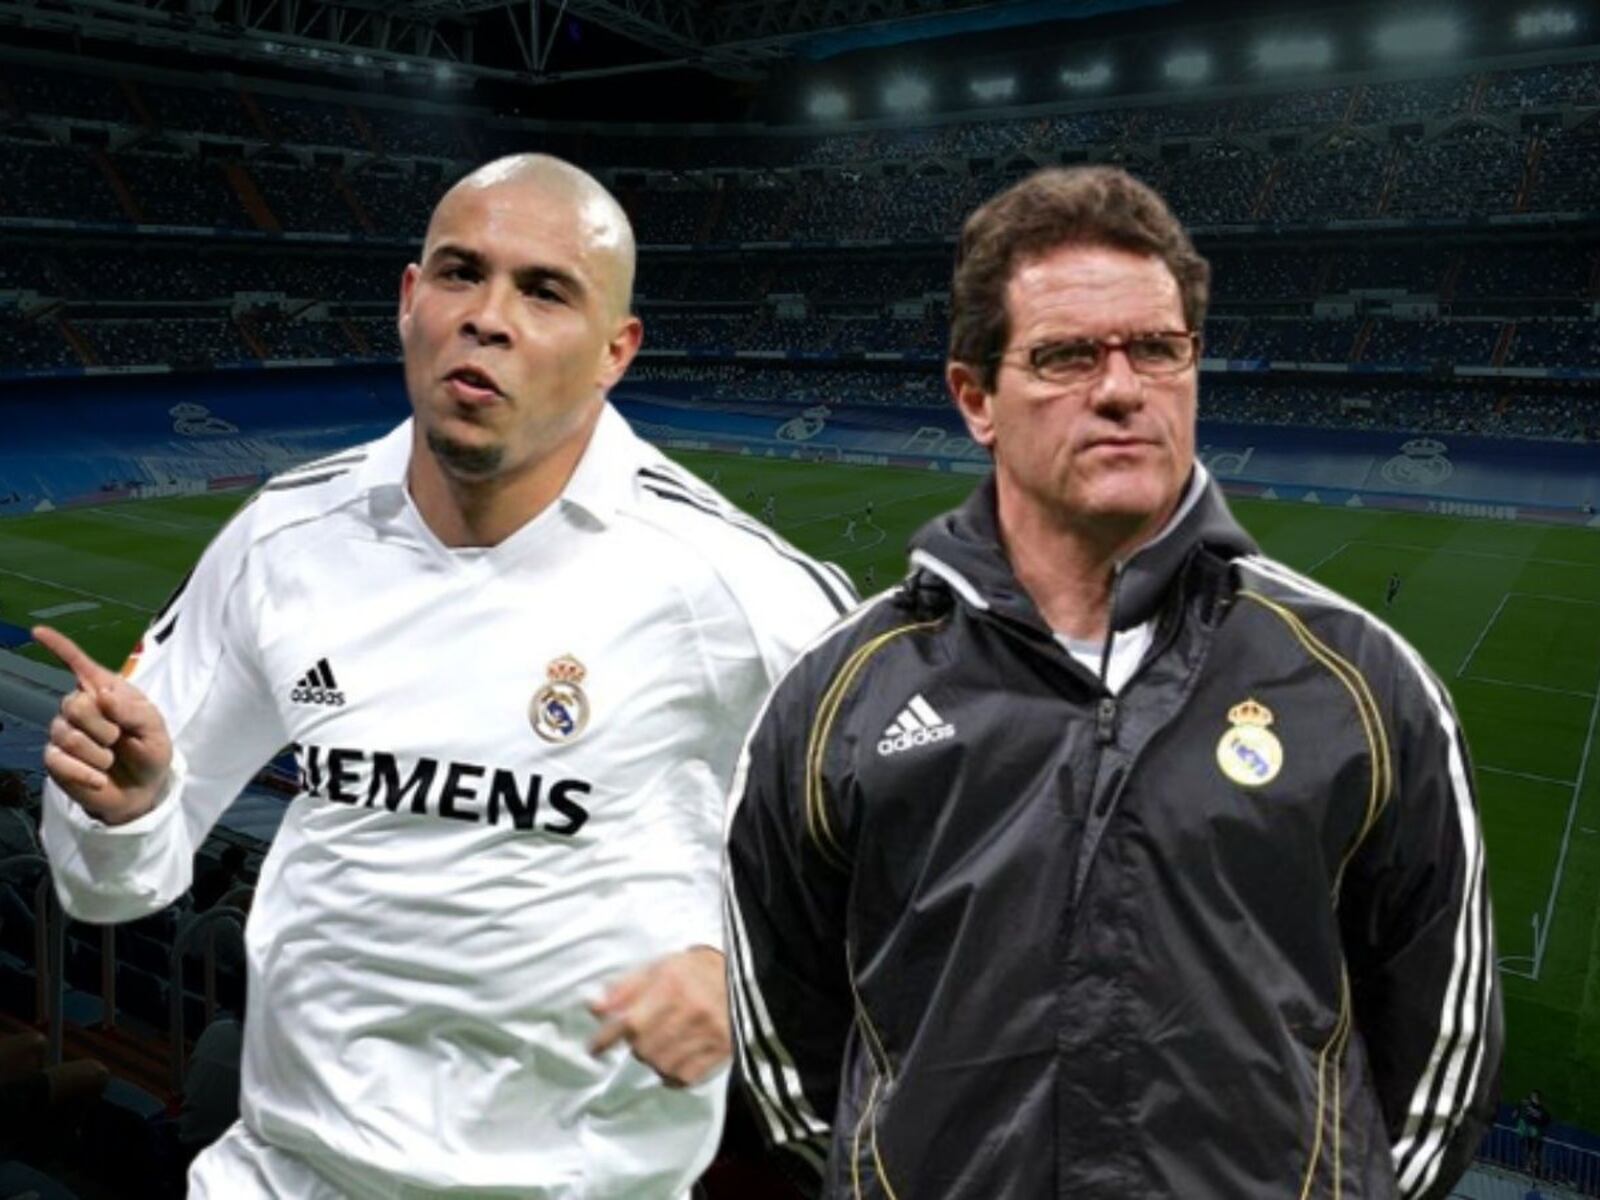 Because of Capello he was fired, the details of his relationship with Ronaldo